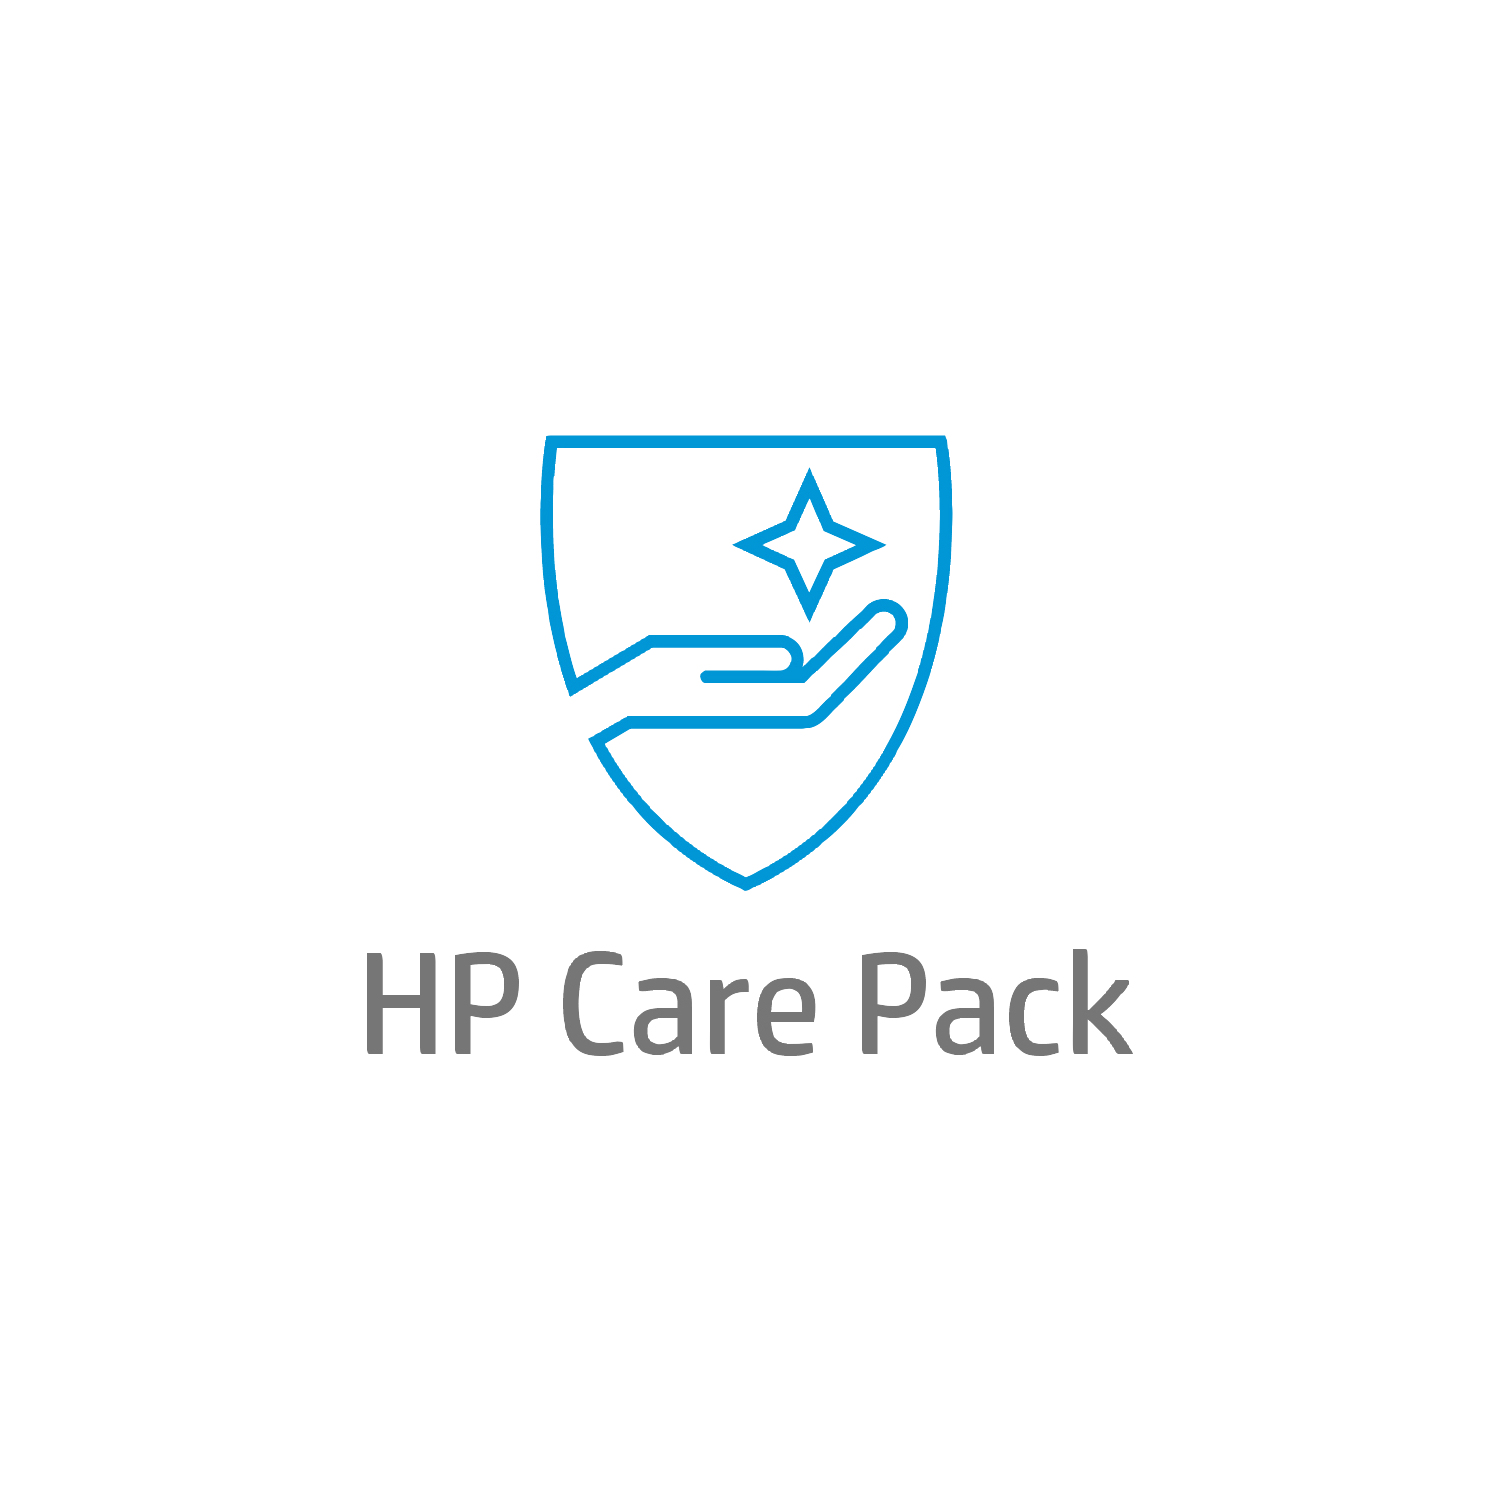 HP 5y 9x5 Workplace 500-999 License Support REQUIRED for each software lic. Purchased